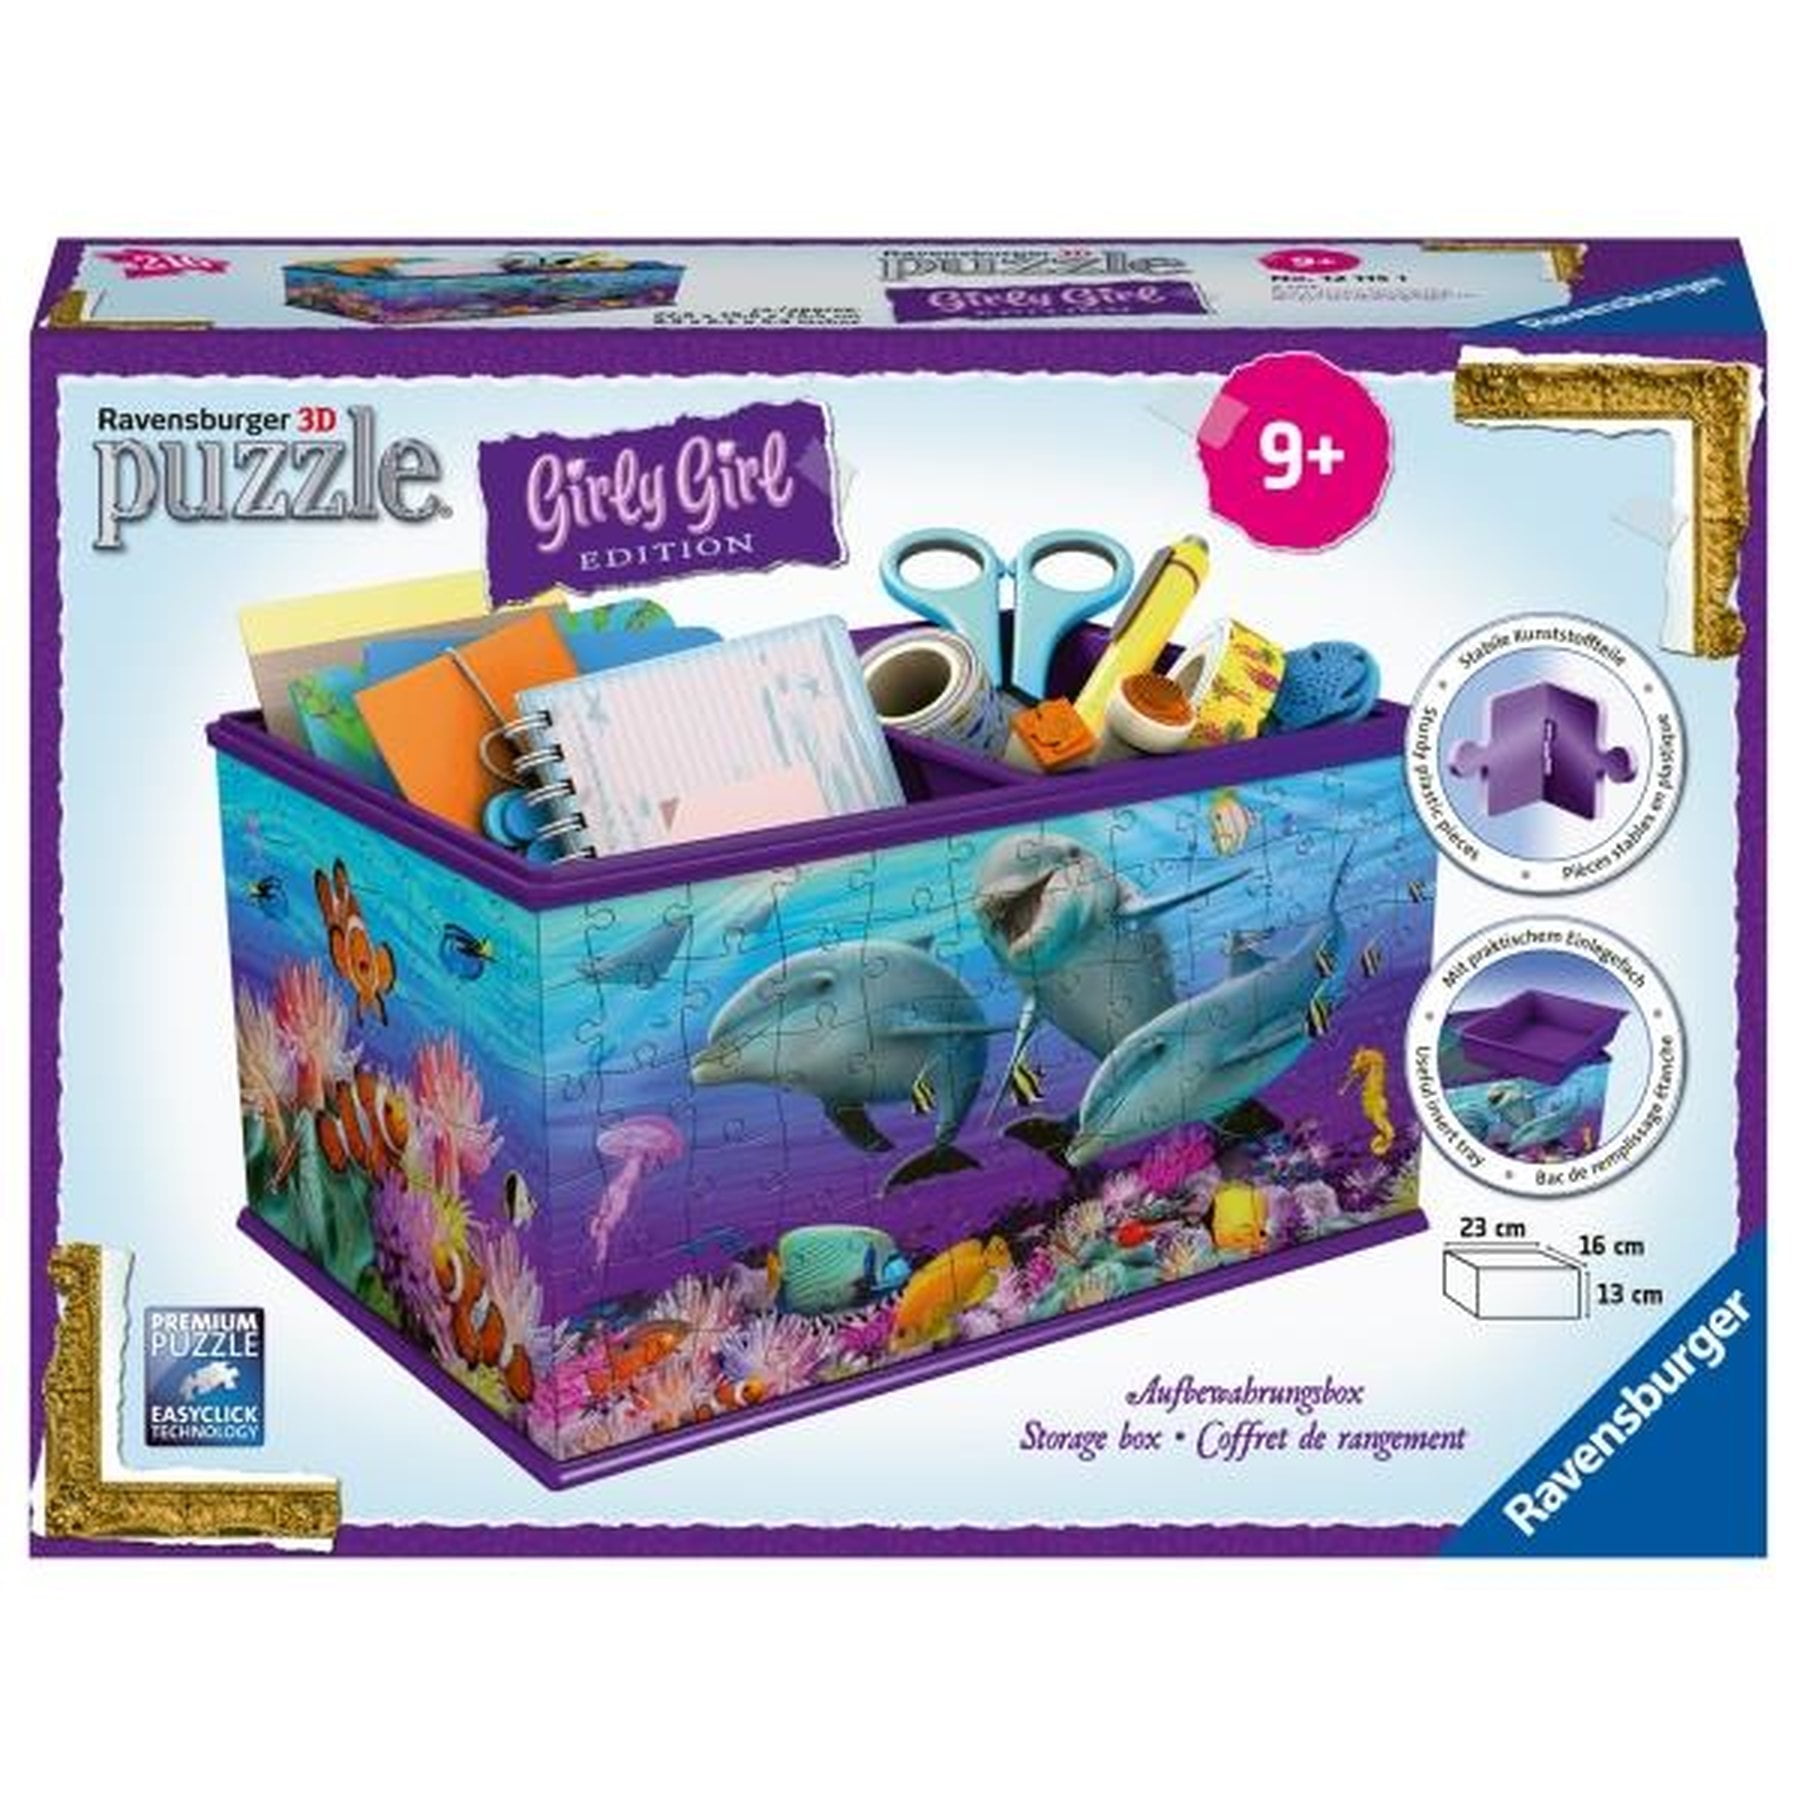 DOLPHINS STORAGE BOX 216 PIECE 3D PUZZLE GIRLY GIRL